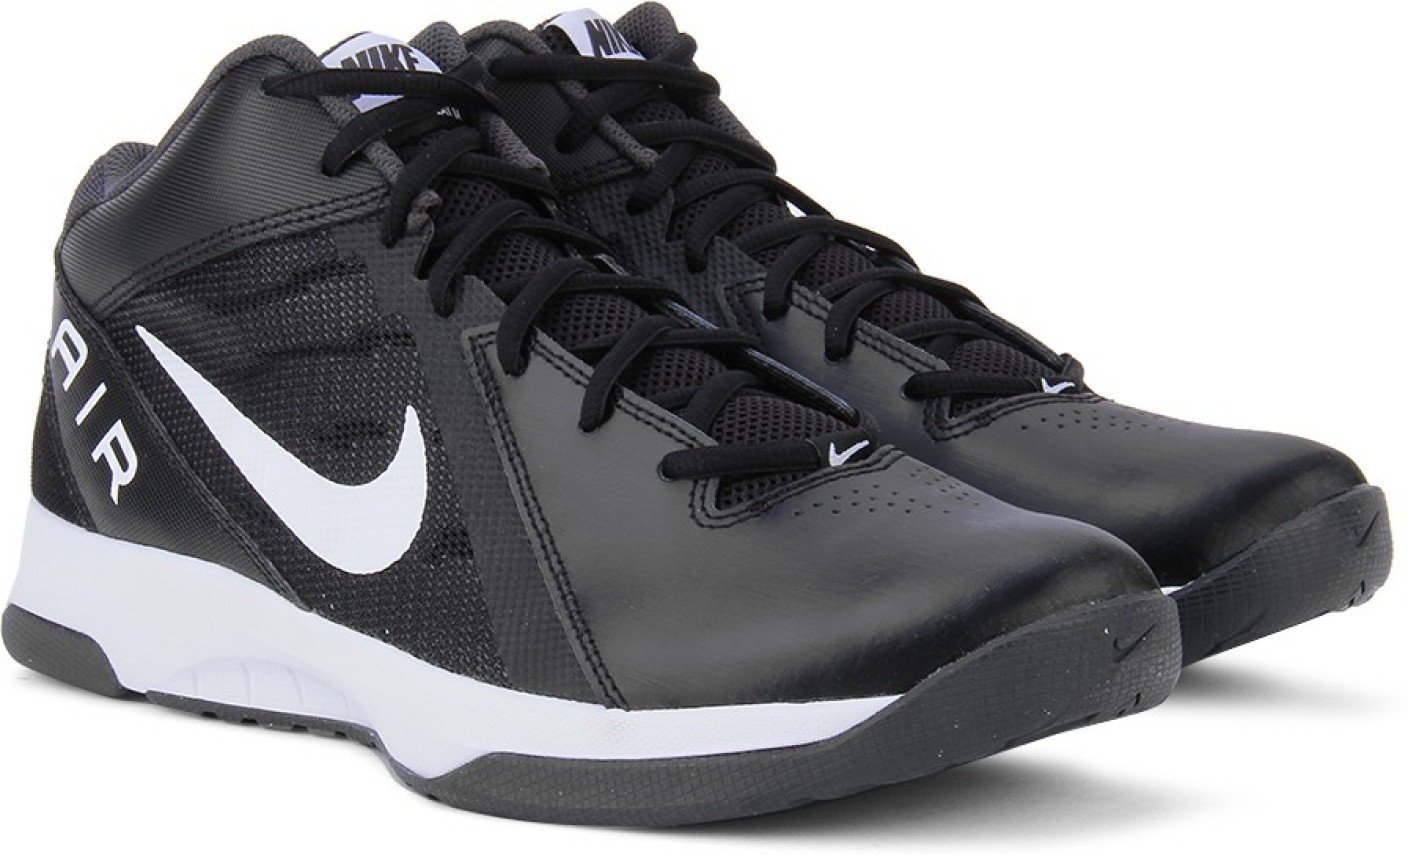 Nike THE AIR OVERPLAY IX Basketball Shoes For Men - Buy BLACK / WHITE ...